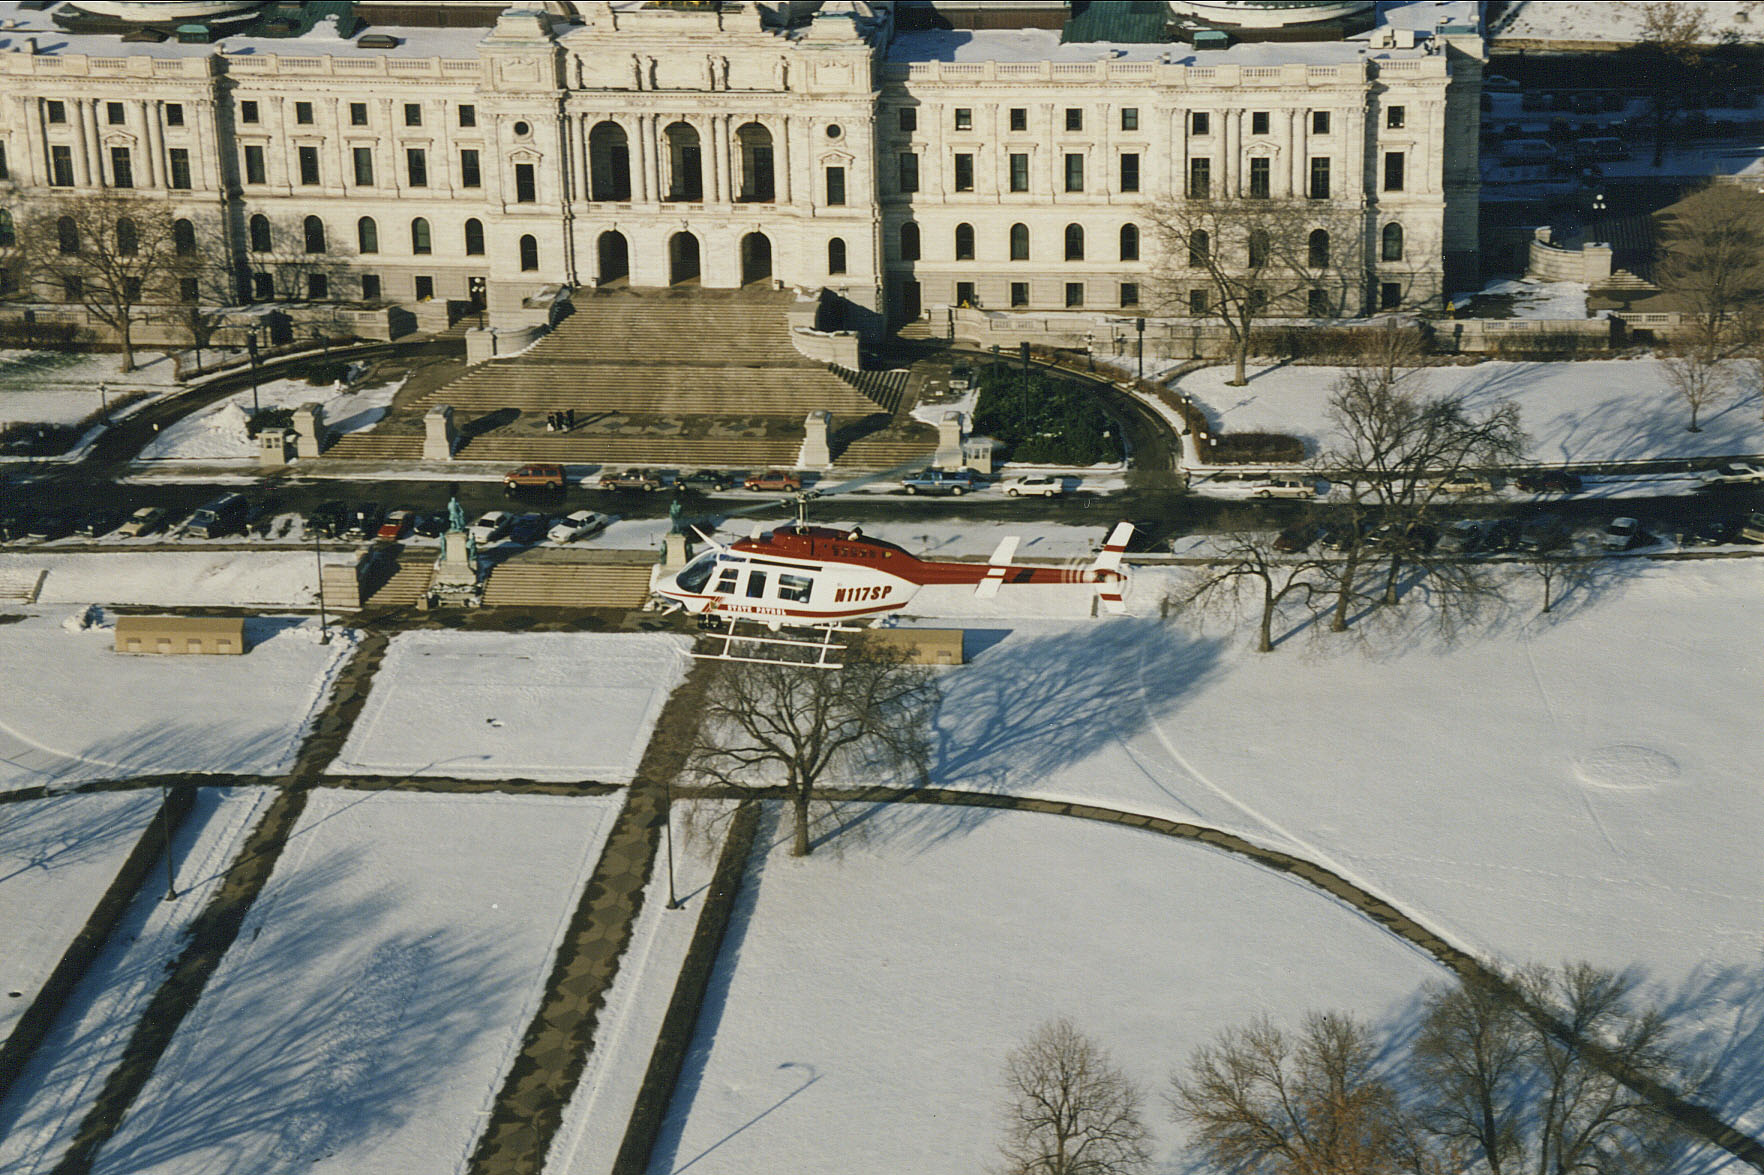 An early state patrol helicopter flying near the Minnesota Capitol building